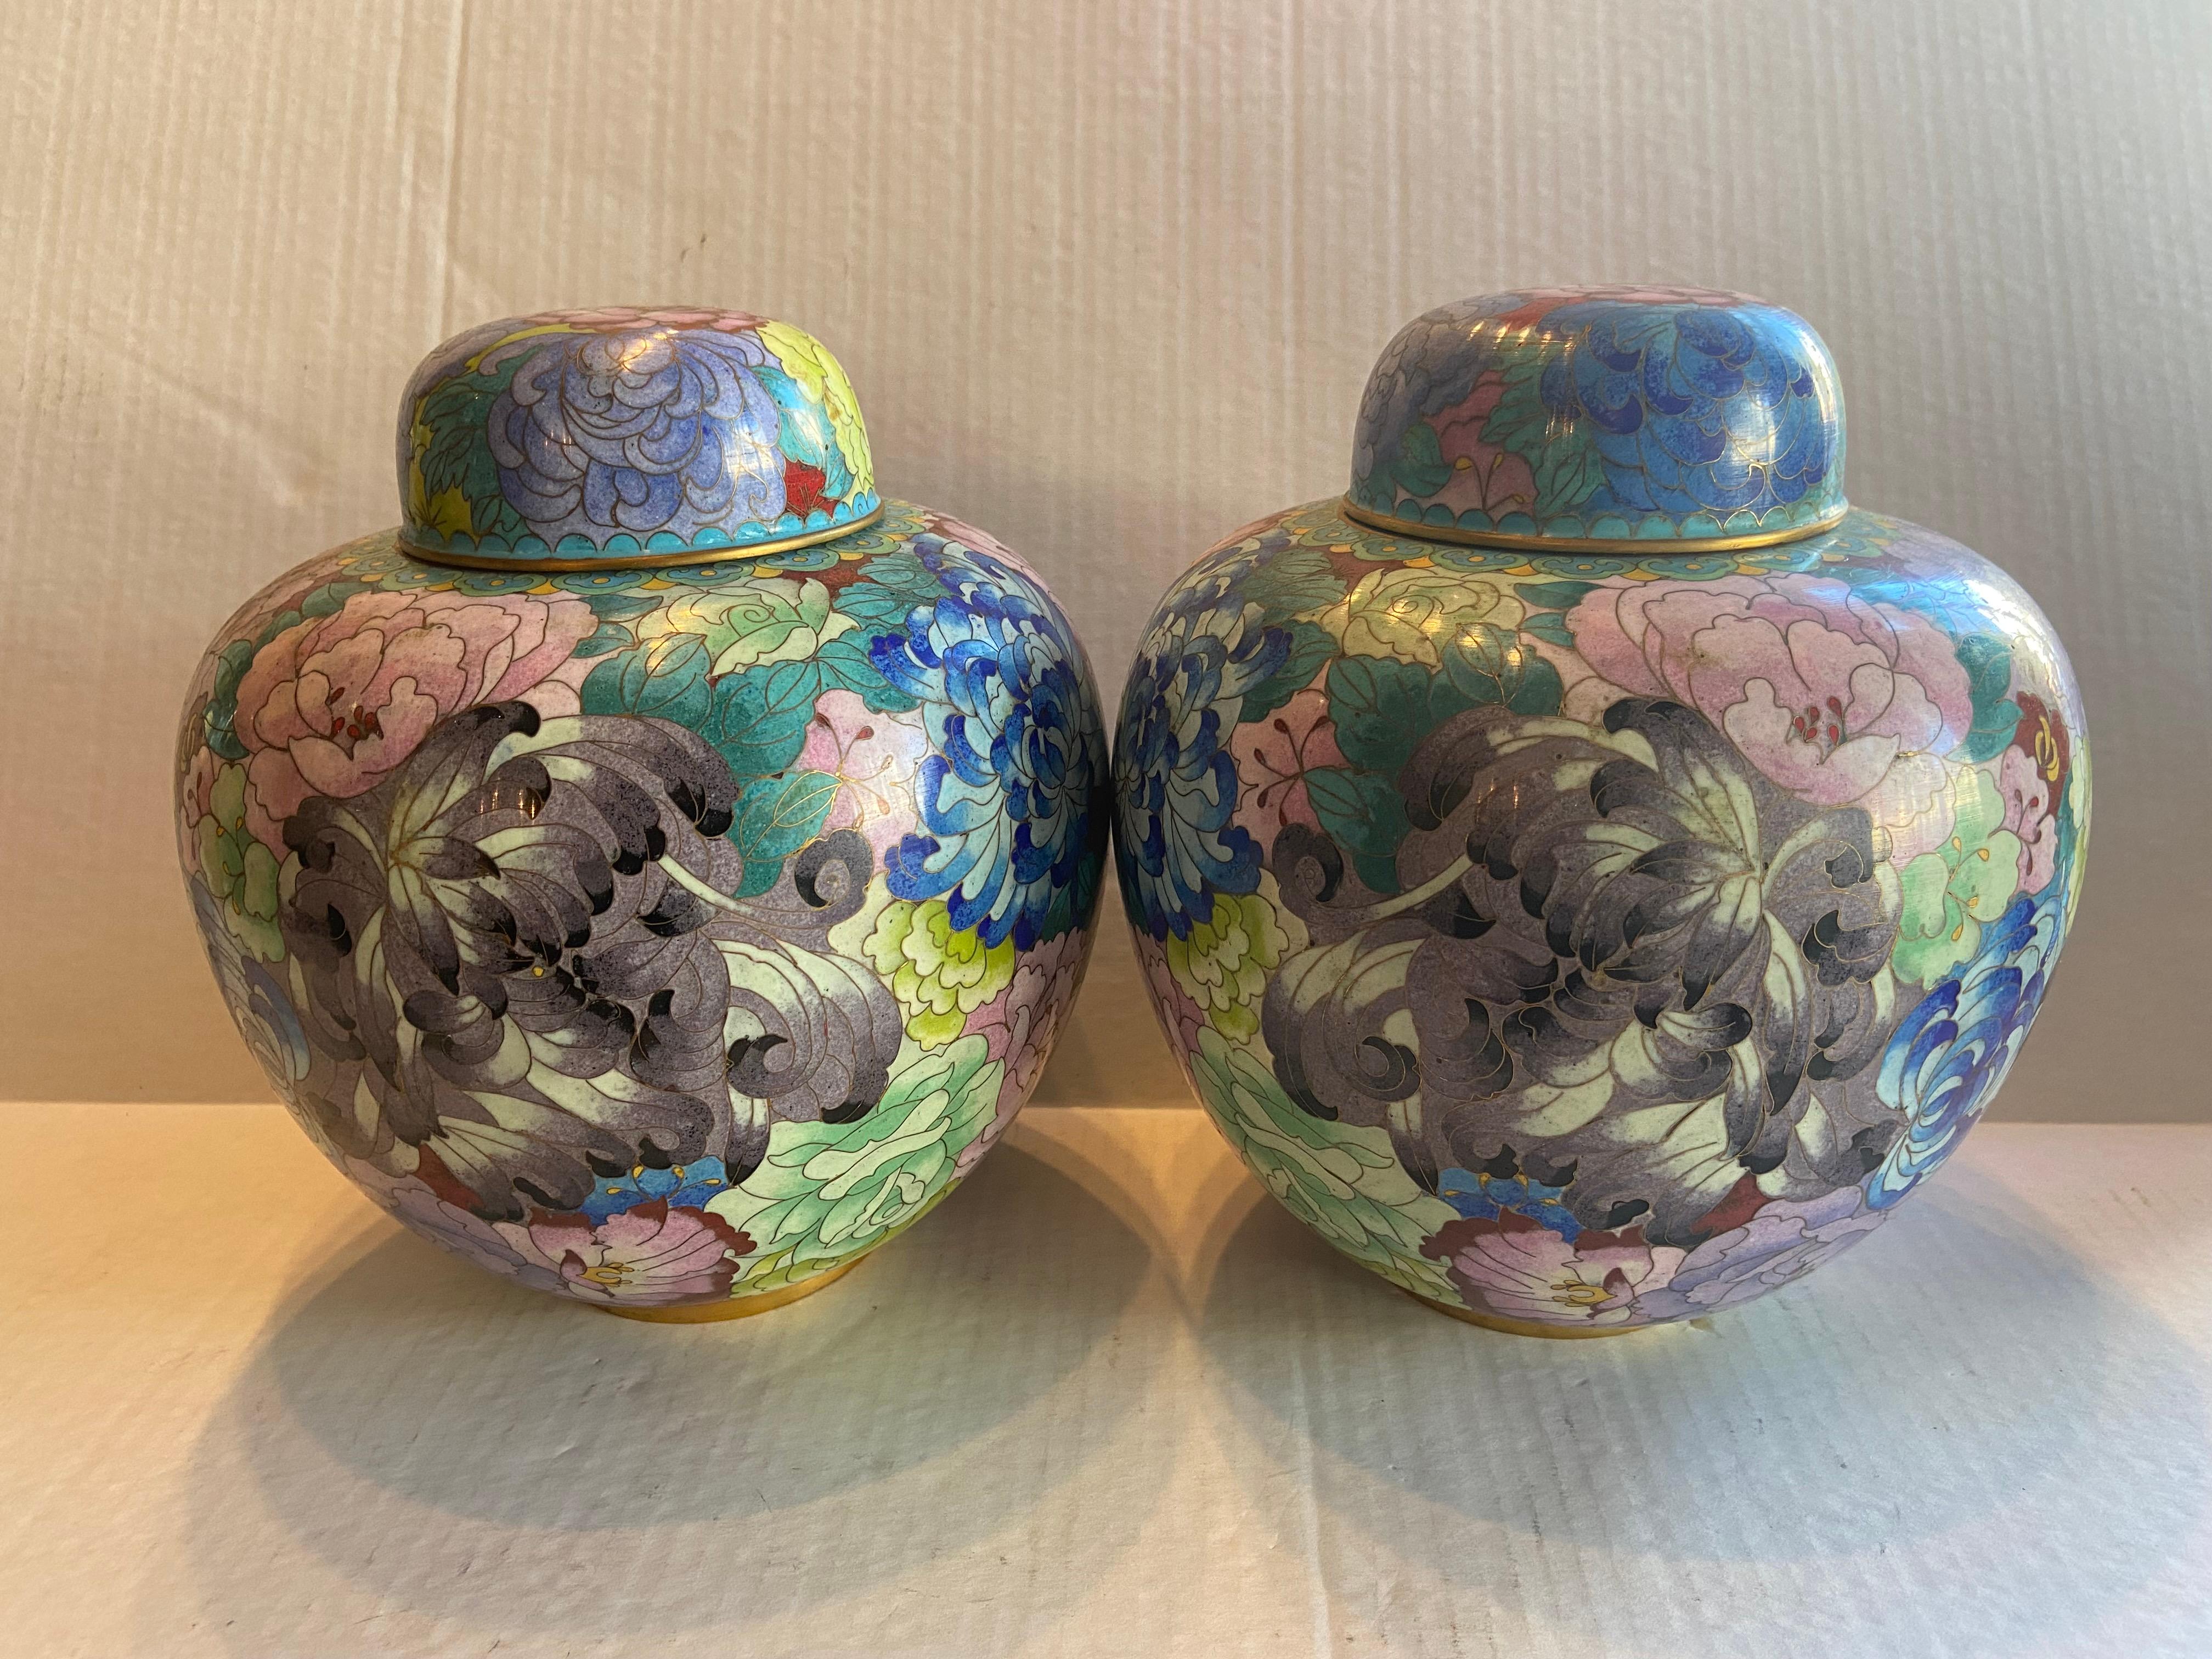 Pair of Chinese Cloisonné Mille Fleur Jars with Lids. Cloisonné is an ancient technique for decorating metalwork objects with colored material held in place or separated by metal strips or wire, normally of gold. Cloisonné enamel objects are worked